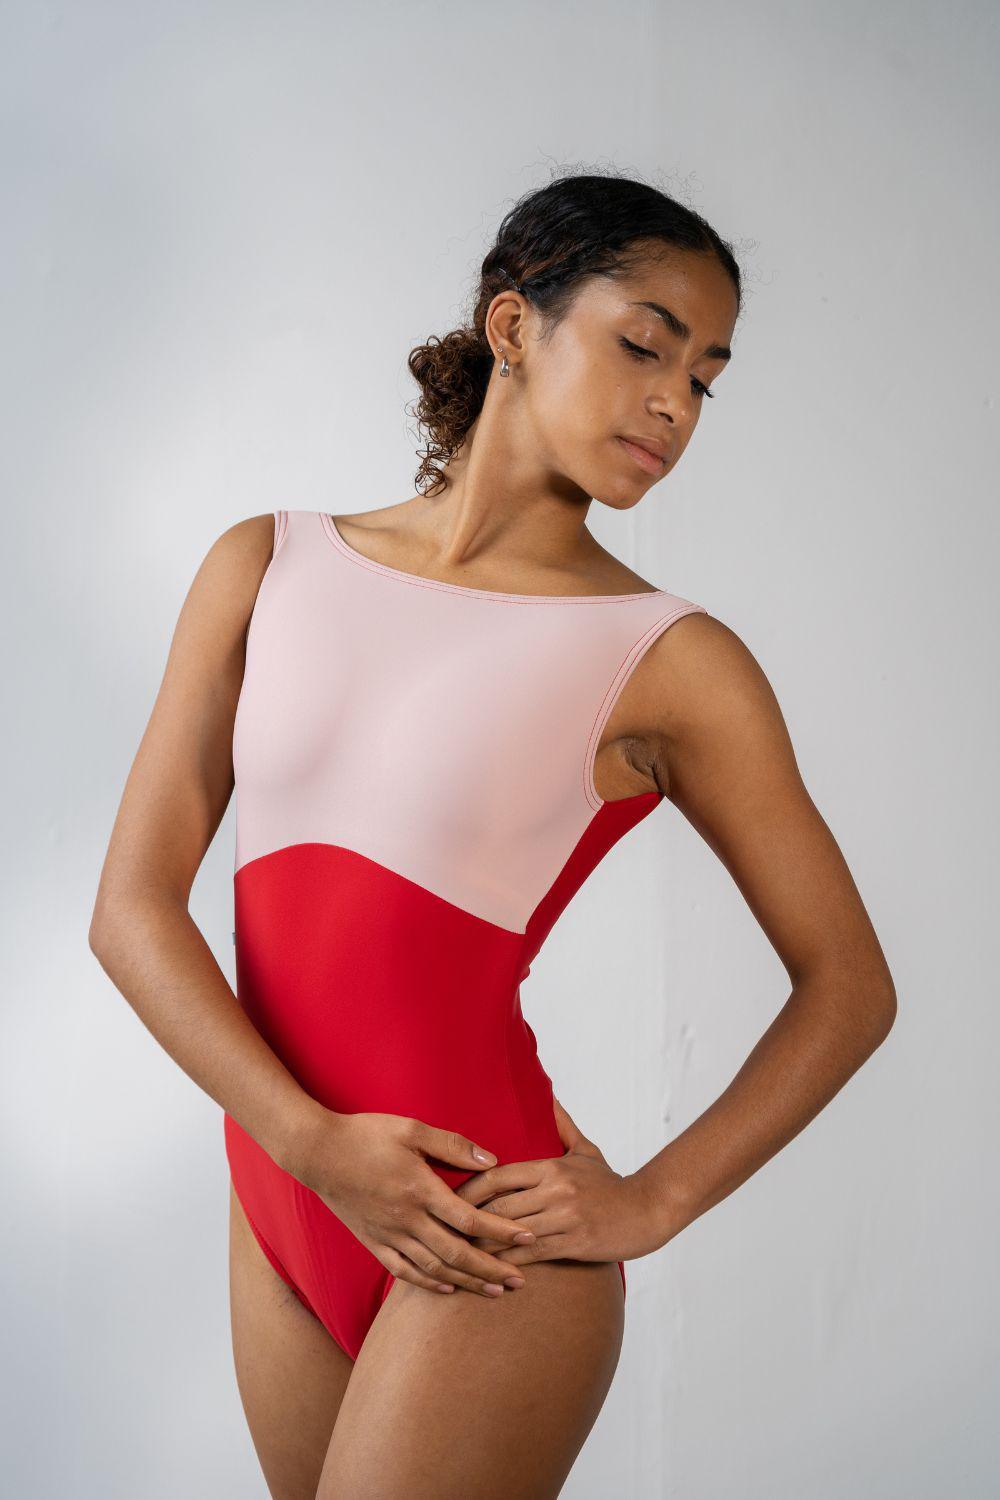 Recession Busting Leotard - Red and Oyster-Women's Leotard-XS-Imperfect Pointes